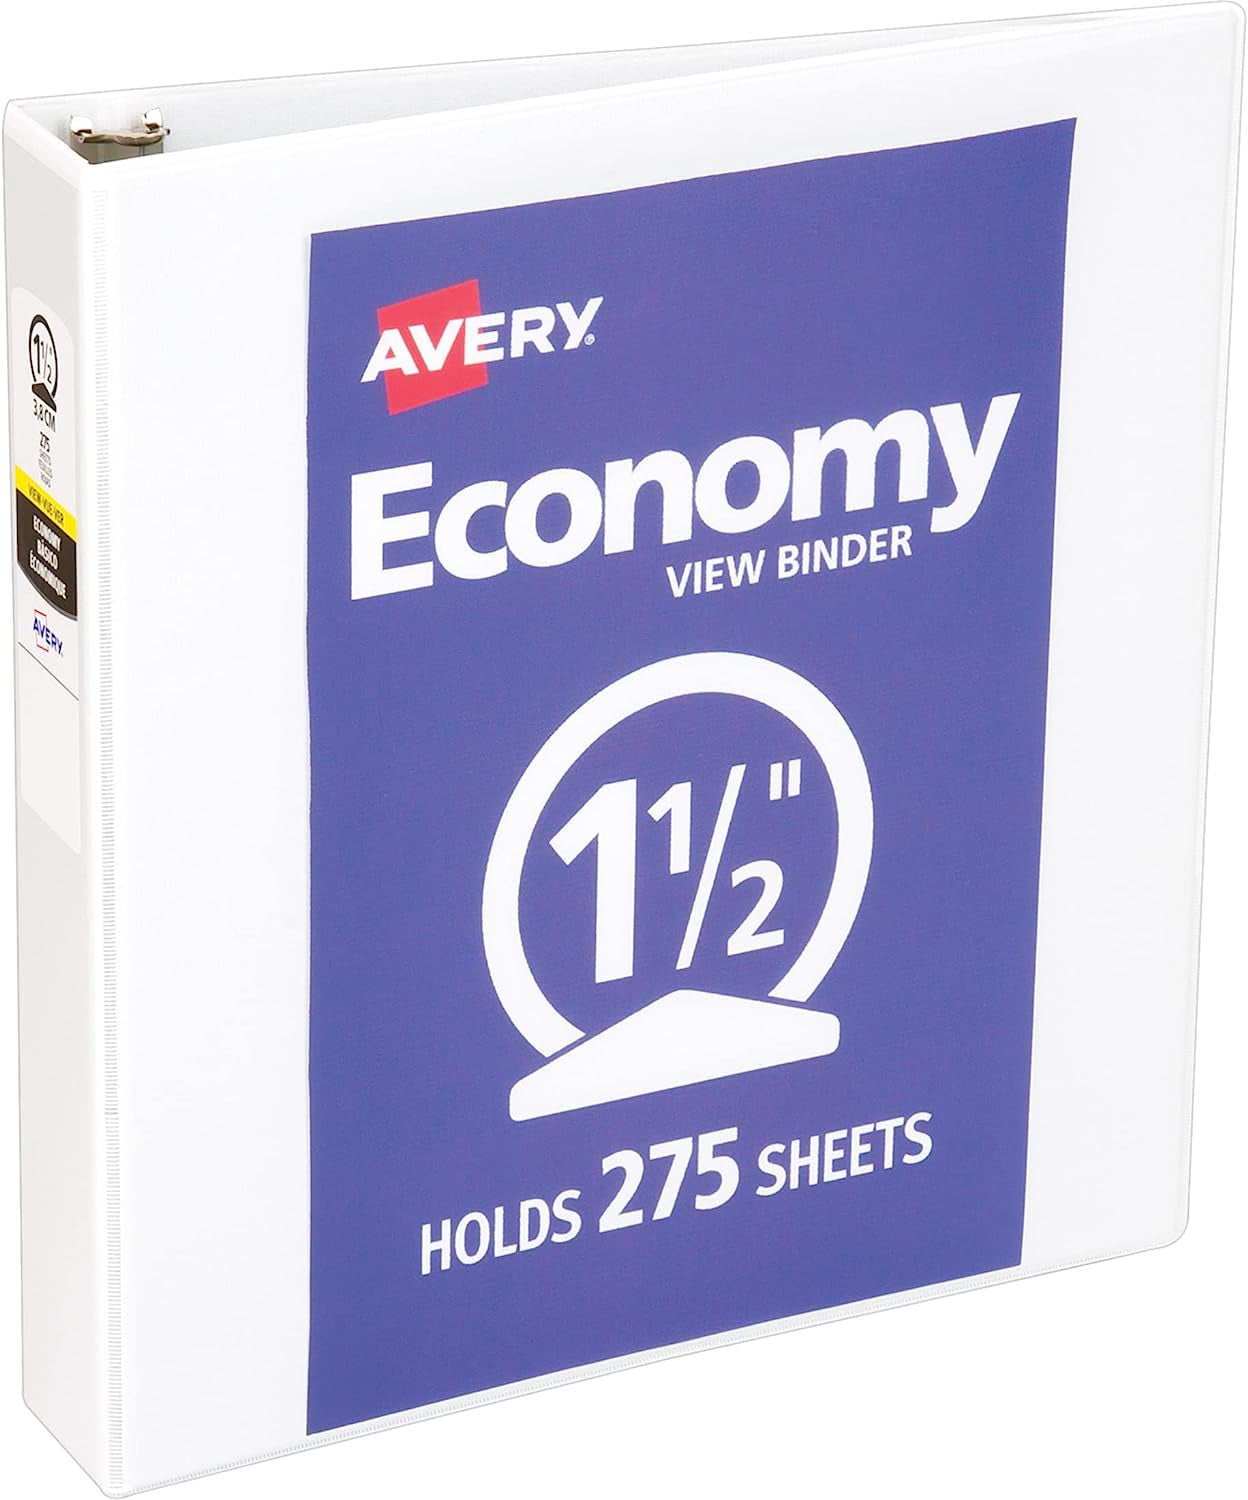 1.5" Economy View Binder with Tear-Resistant Cover